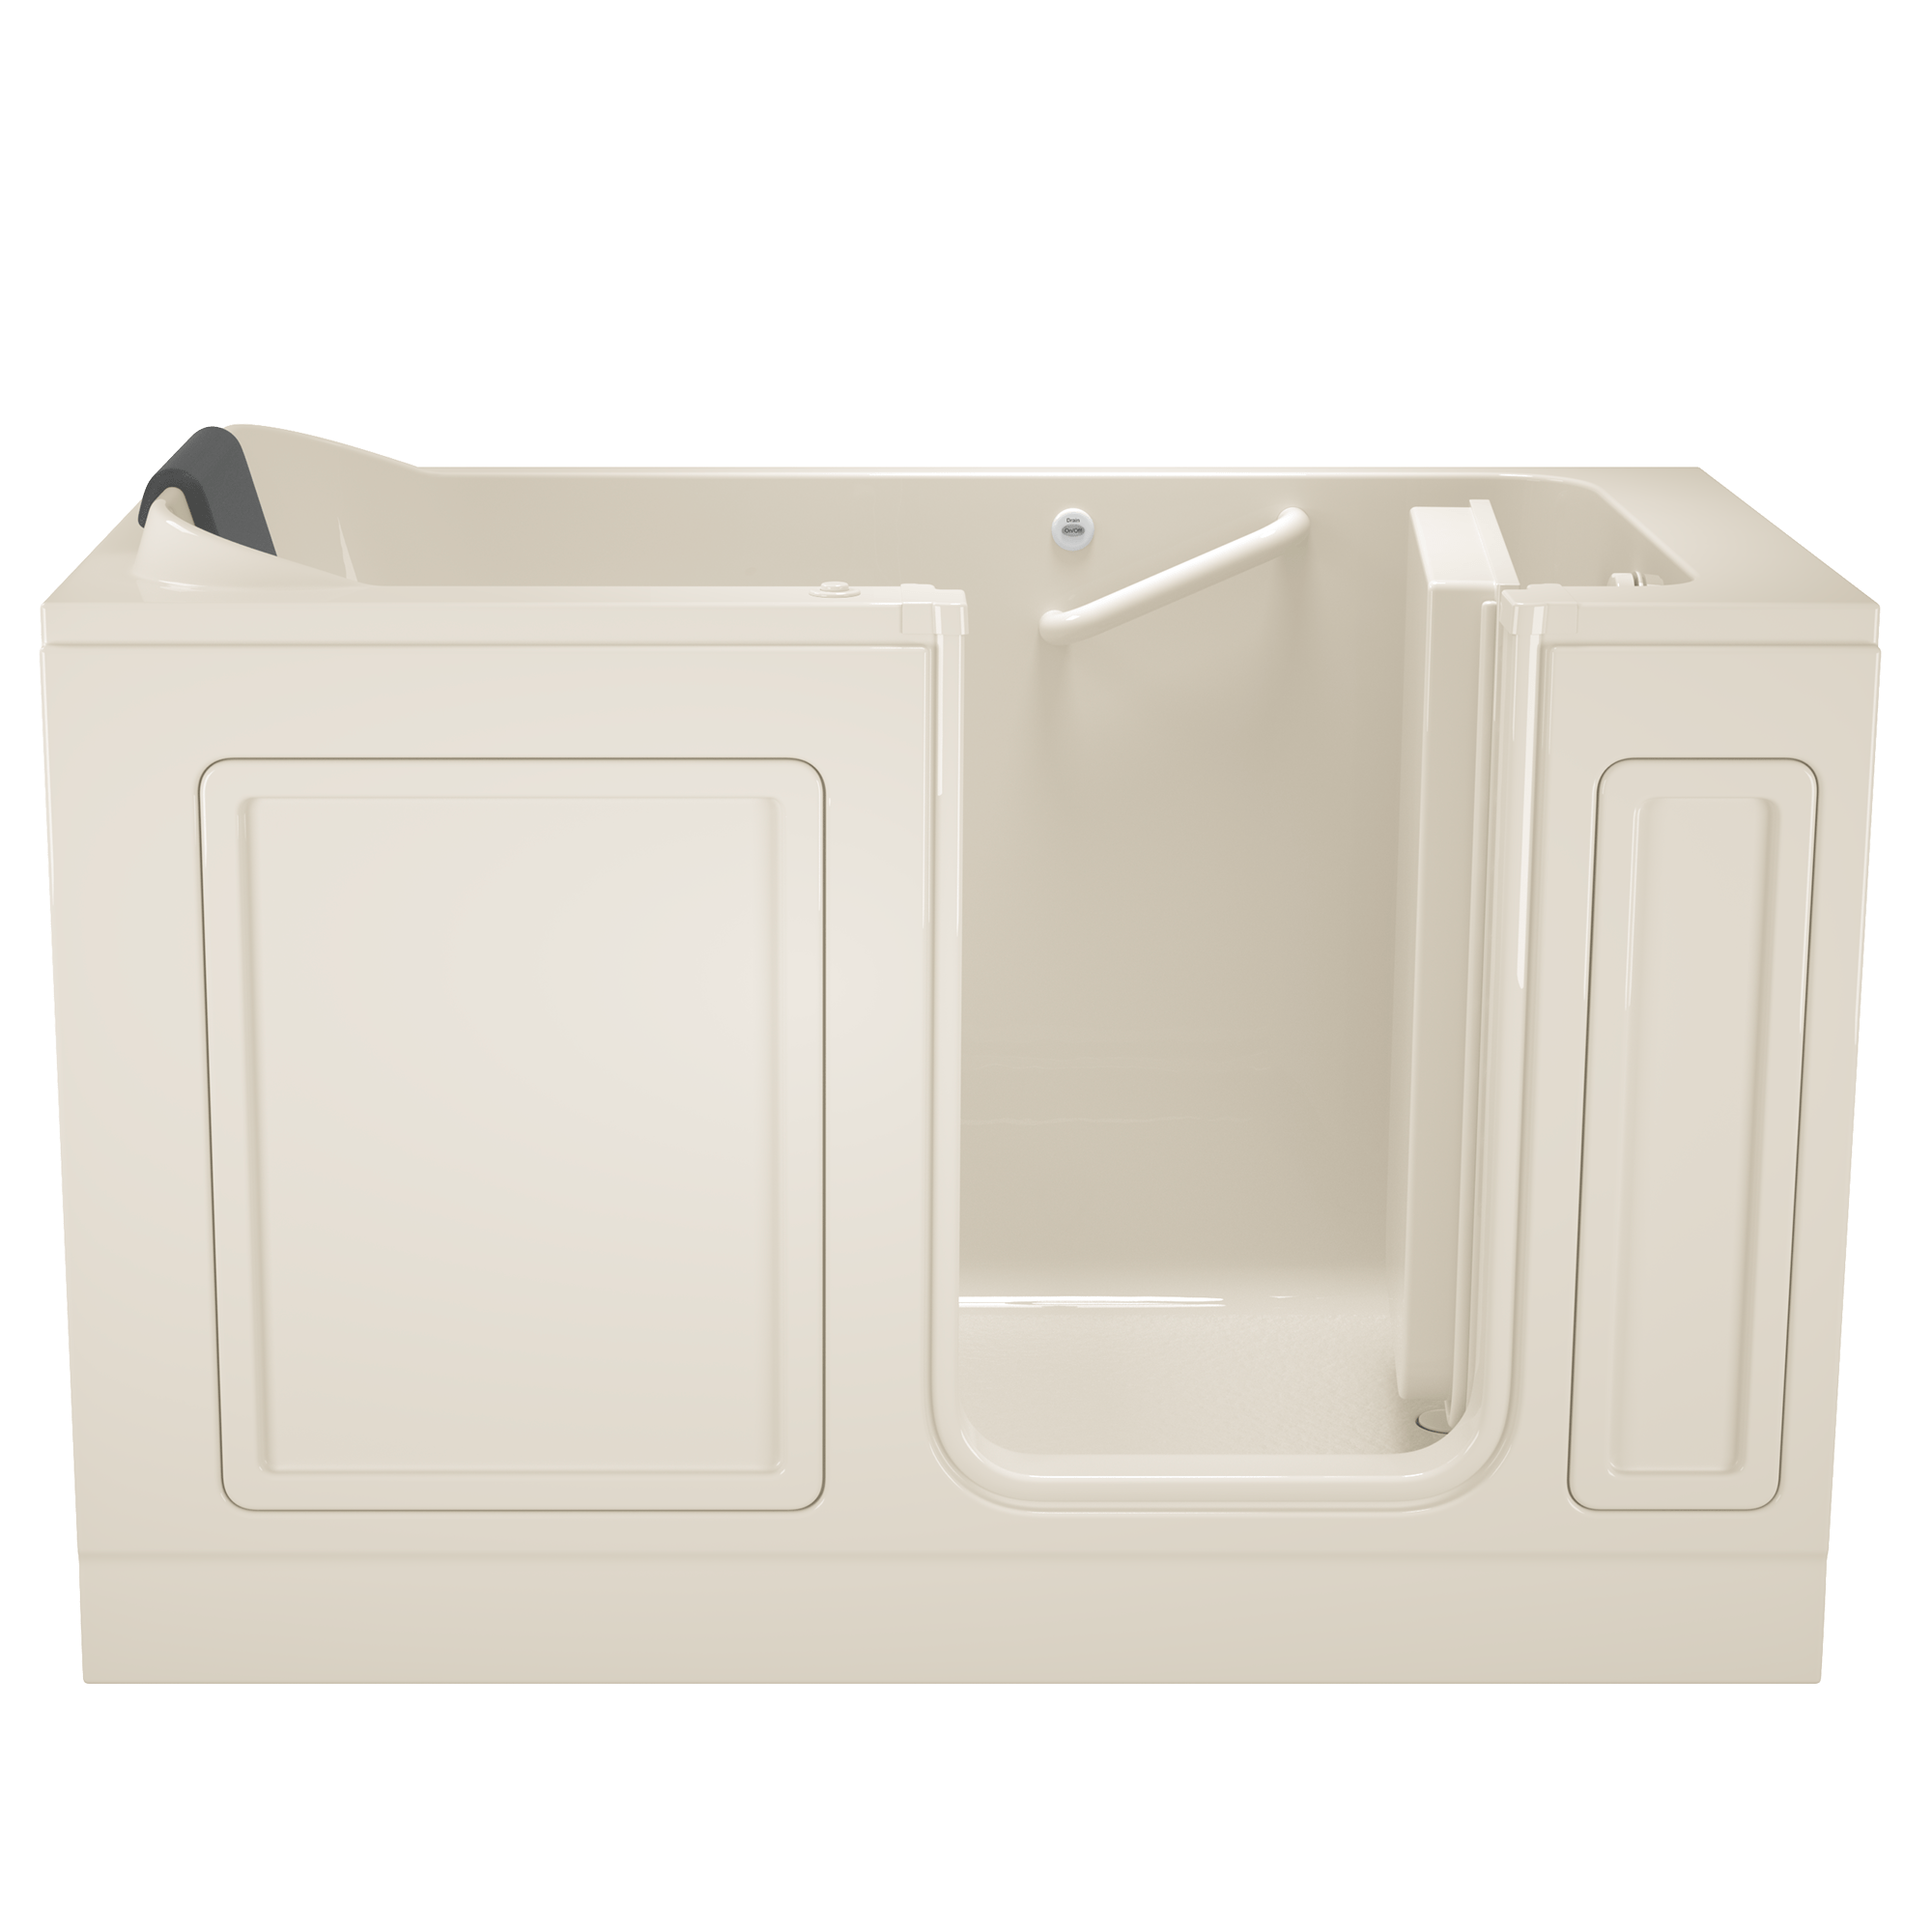 Acrylic Luxury Series 32 x 60 -Inch Walk-in Tub With Whirlpool System - Right-Hand Drain